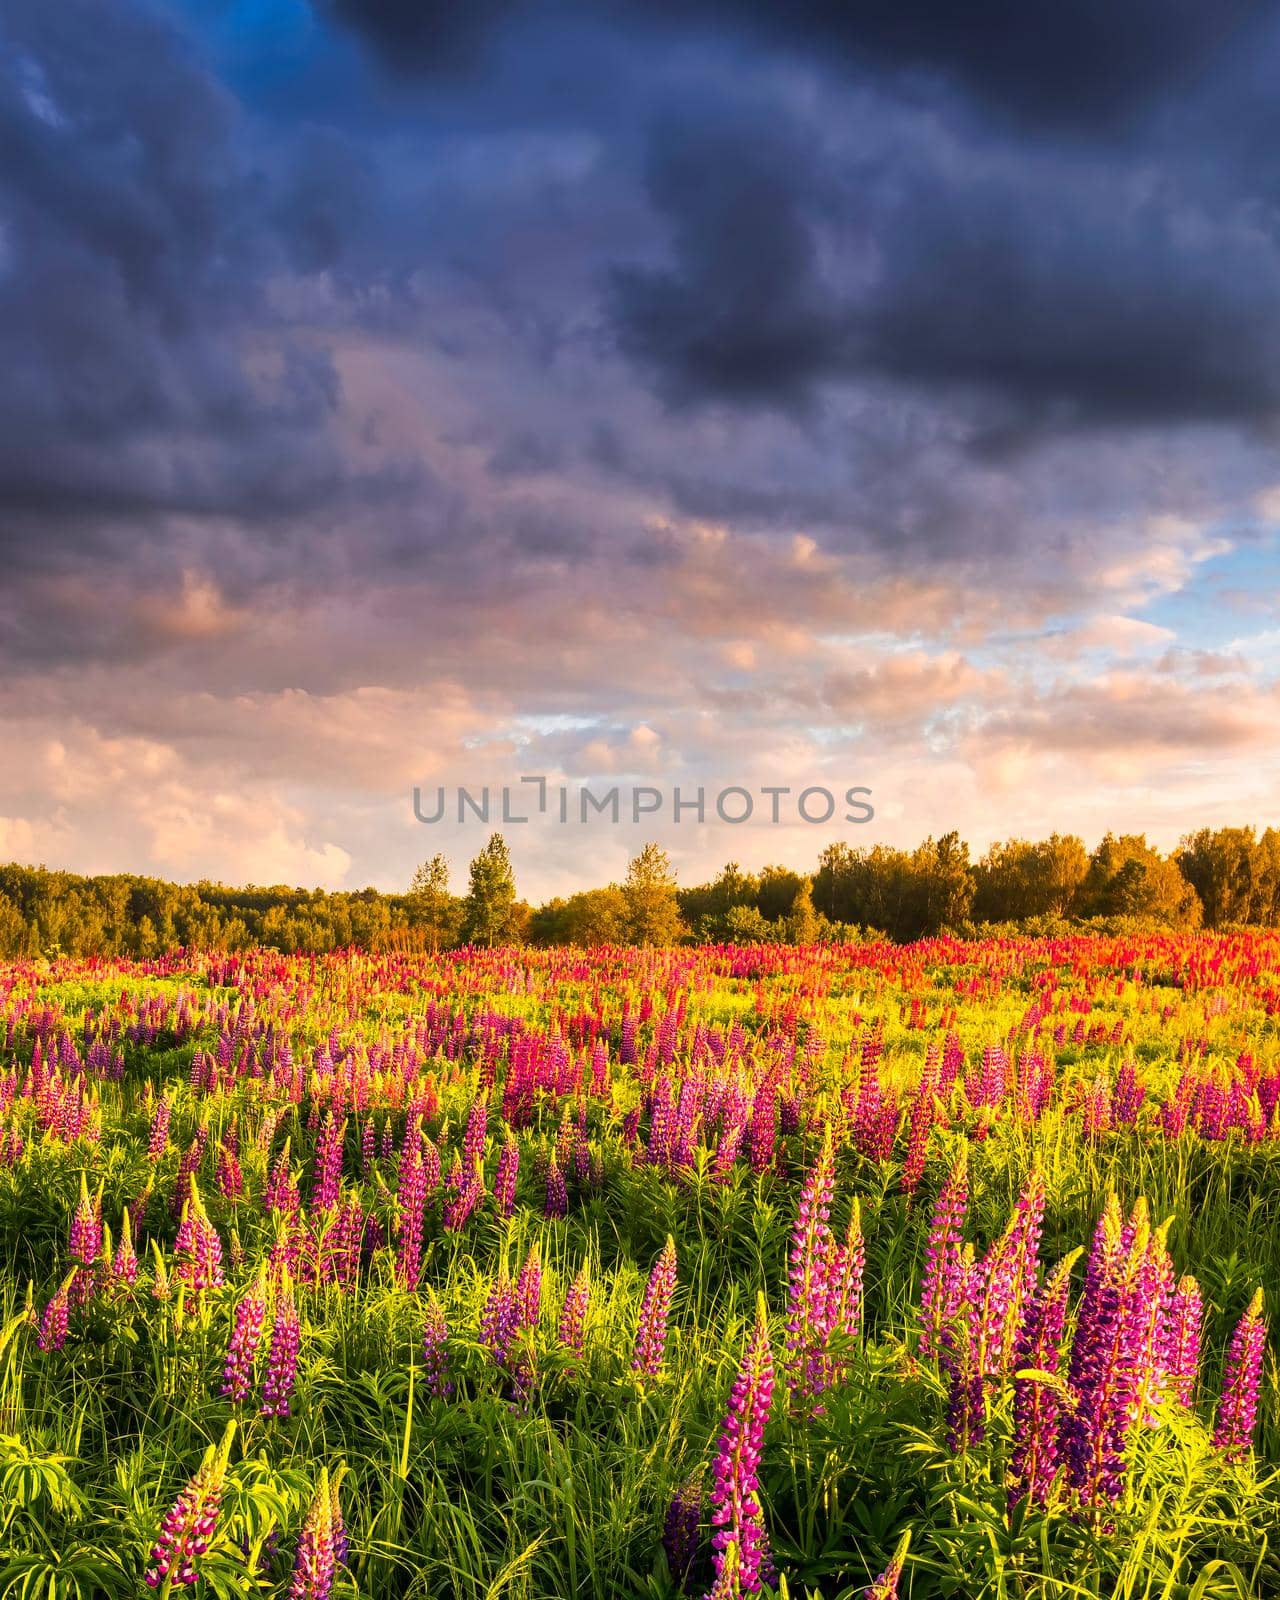 Sunset or sunrise on a field with purple wild lupines and cloudy sky in summer.